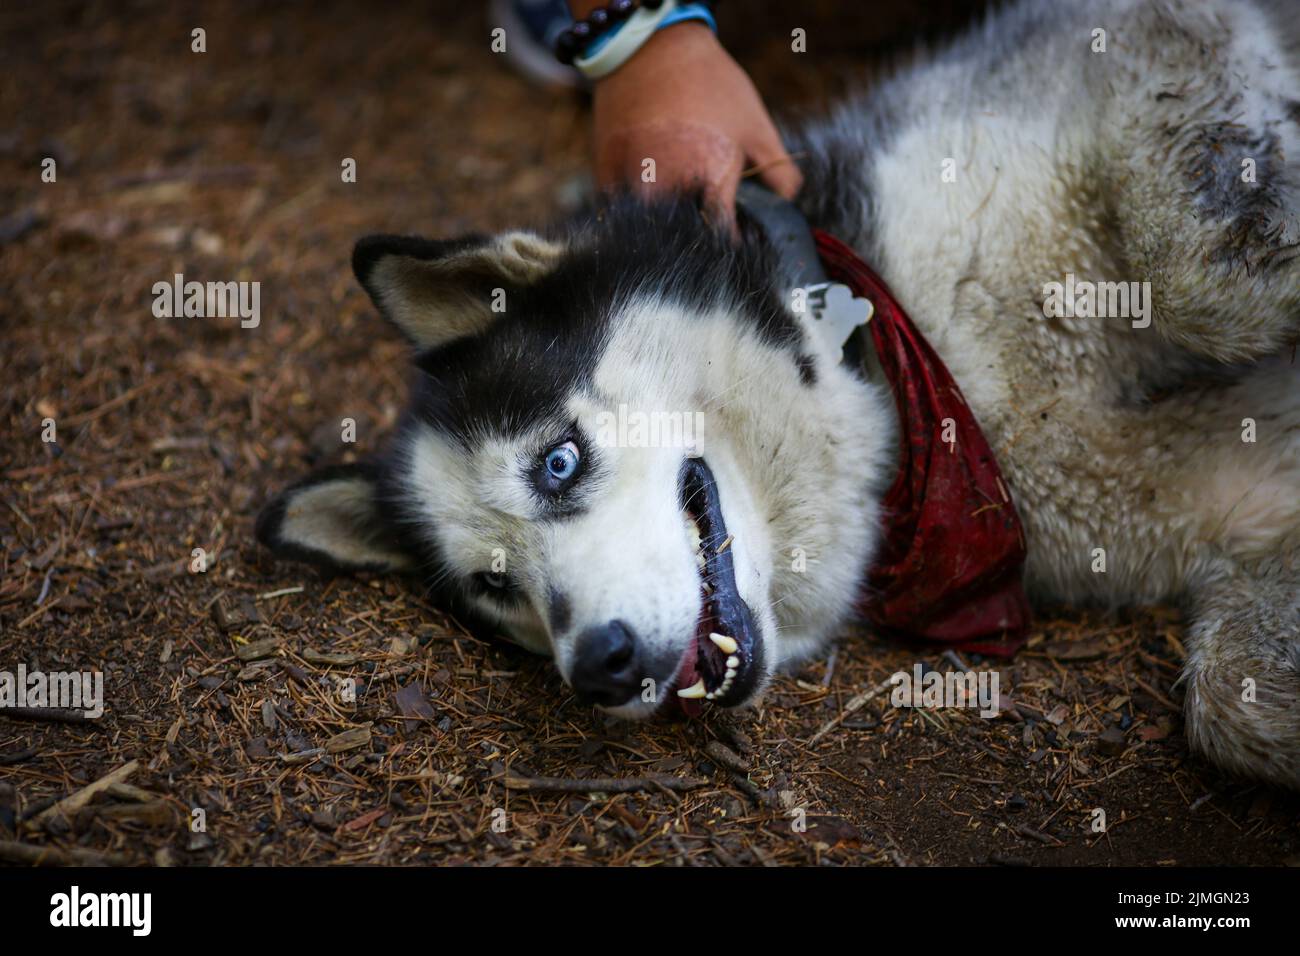 A lying husky dog wearing a red neck bandana with a person holding its collar Stock Photo